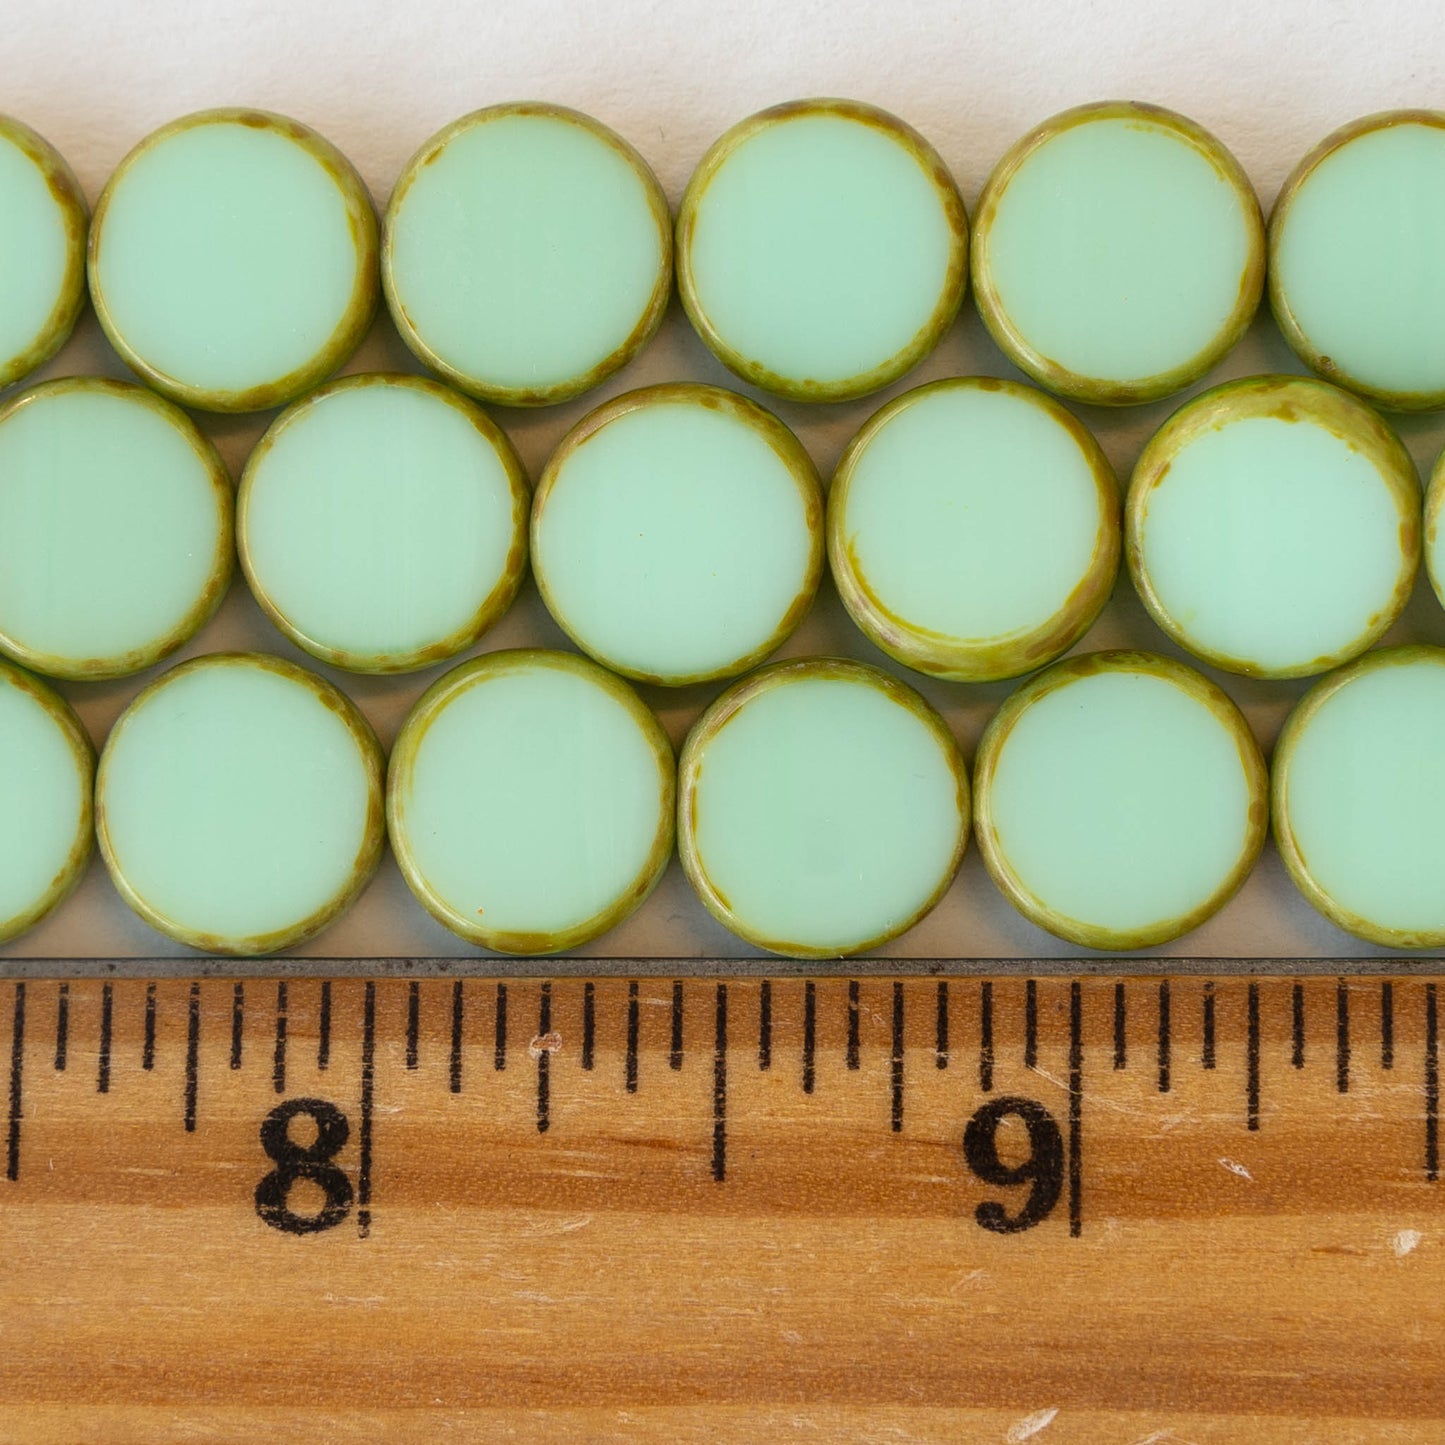 12mm Coin Beads - Opaque Lt. Green with Picasso - 10 beads